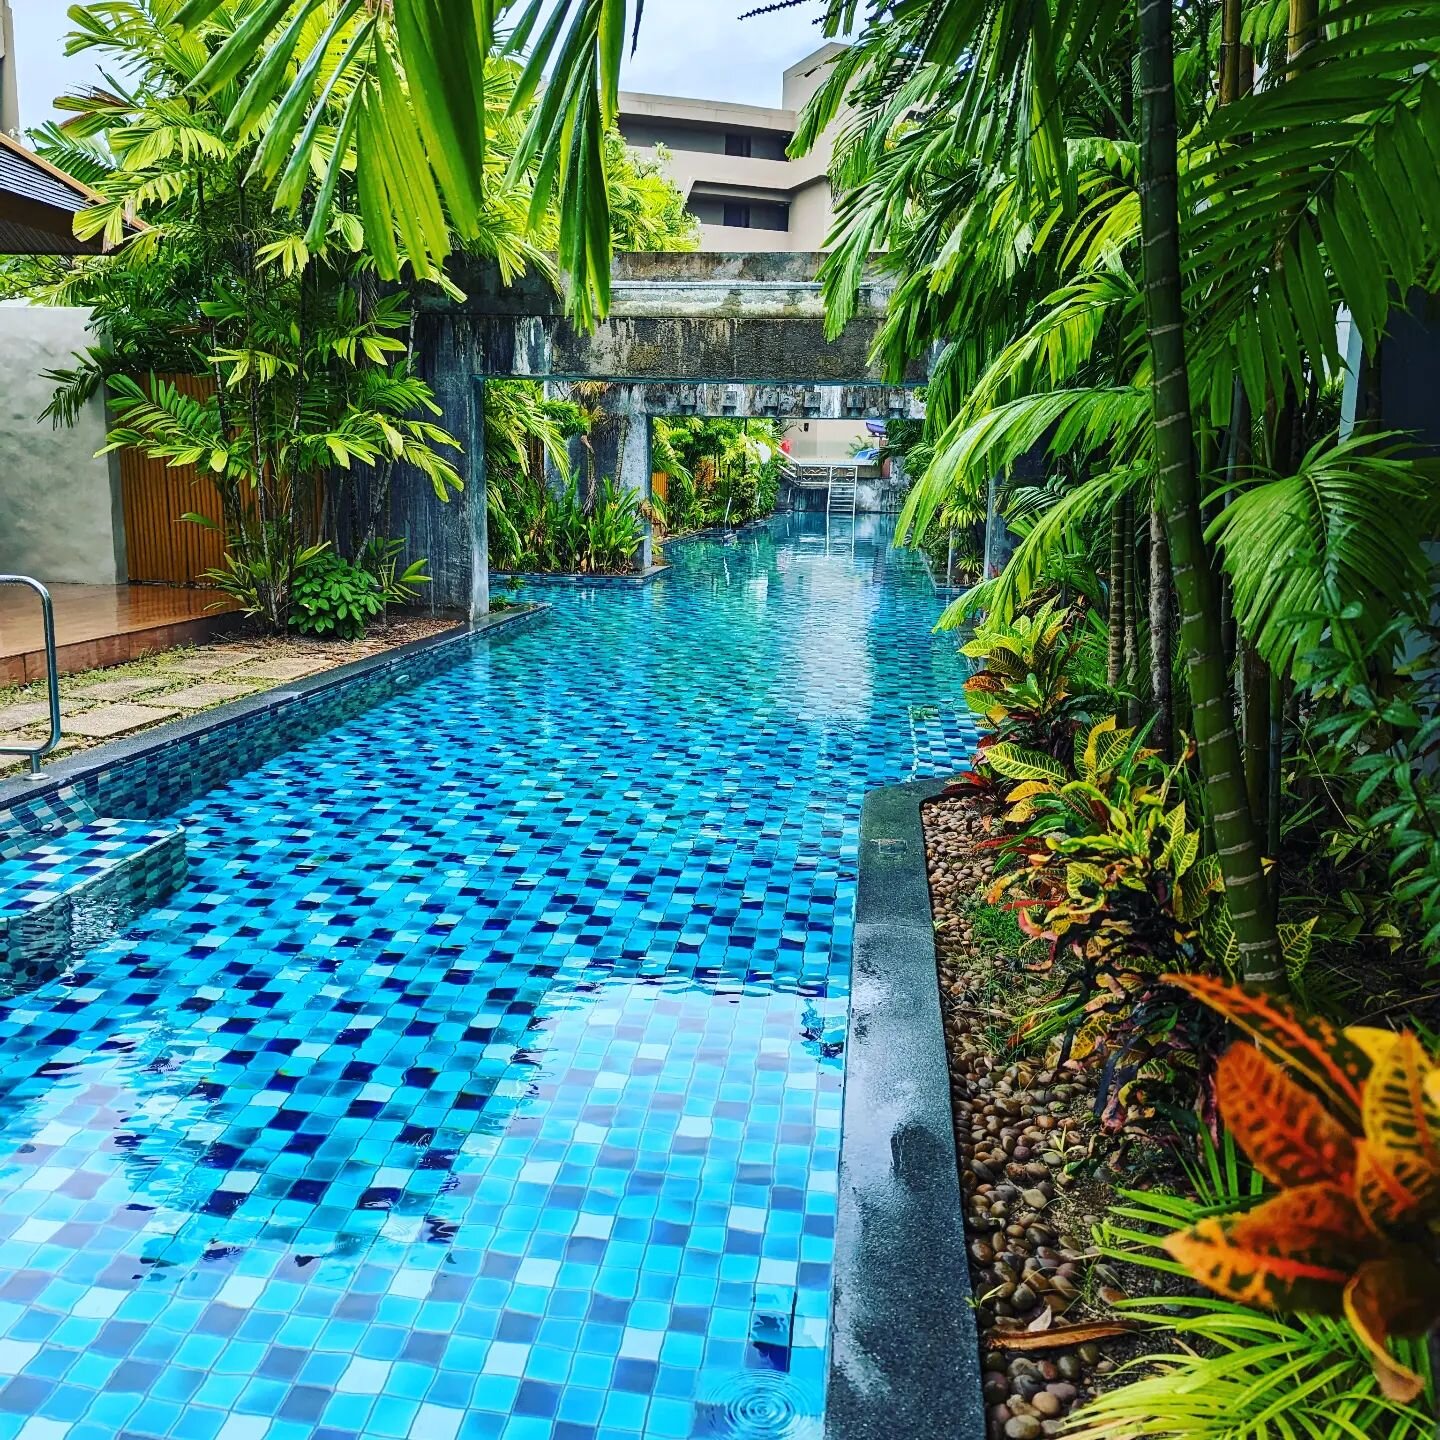 Favorite hotel of the trip in Kata. Beautiful pool with #bamboo right out the back door. 

#bambooforthewin #ecofriendlyliving  #islandlife #poolside